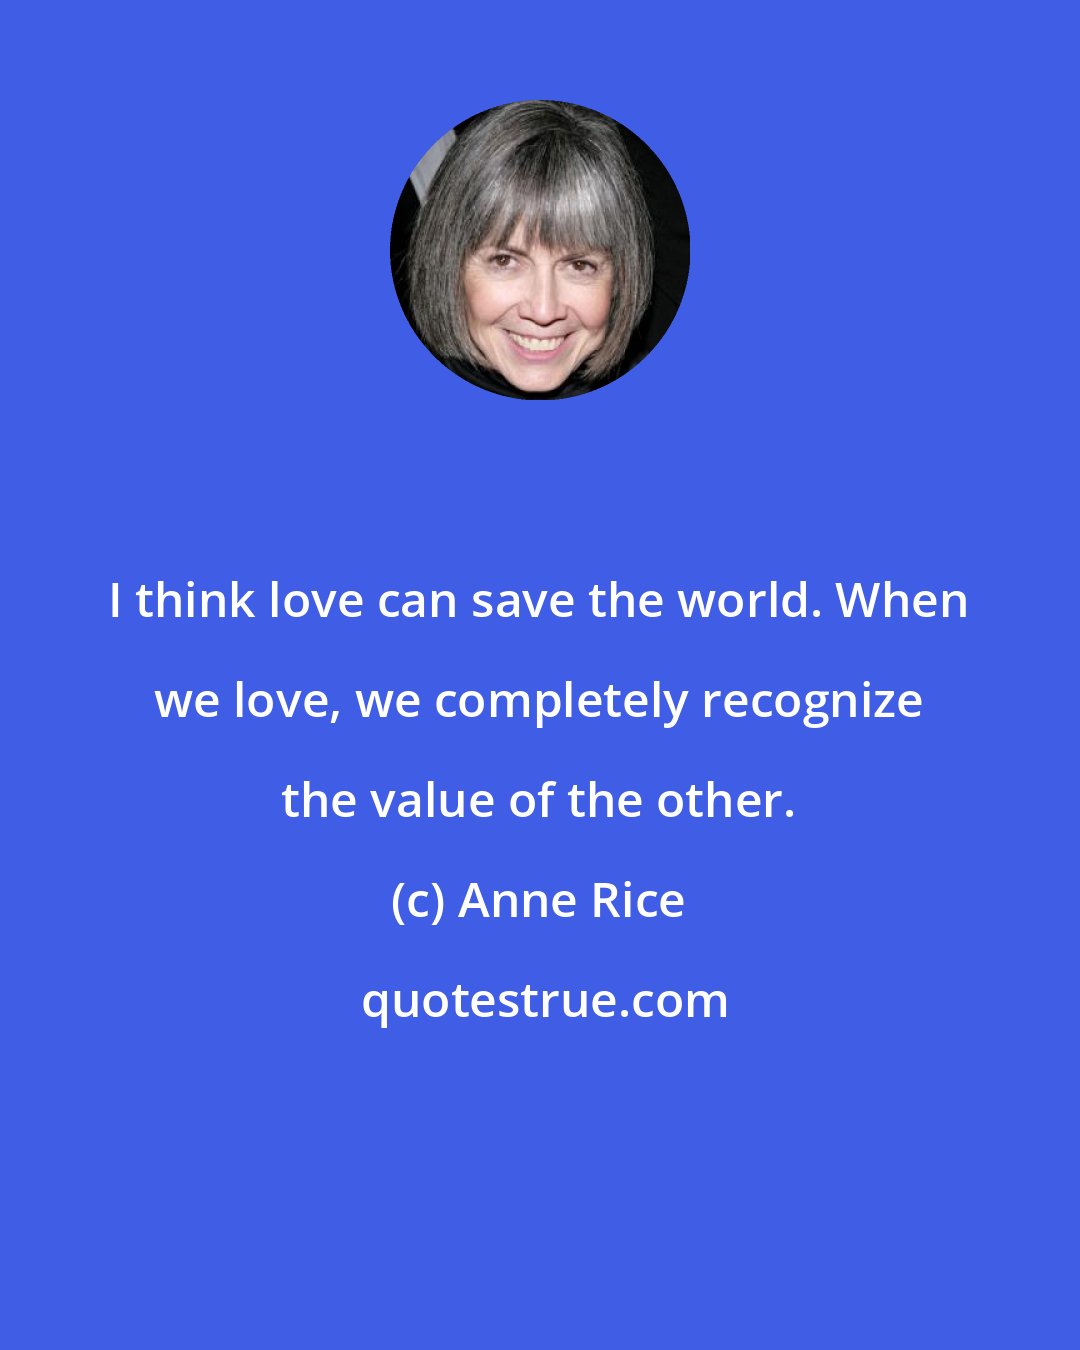 Anne Rice: I think love can save the world. When we love, we completely recognize the value of the other.